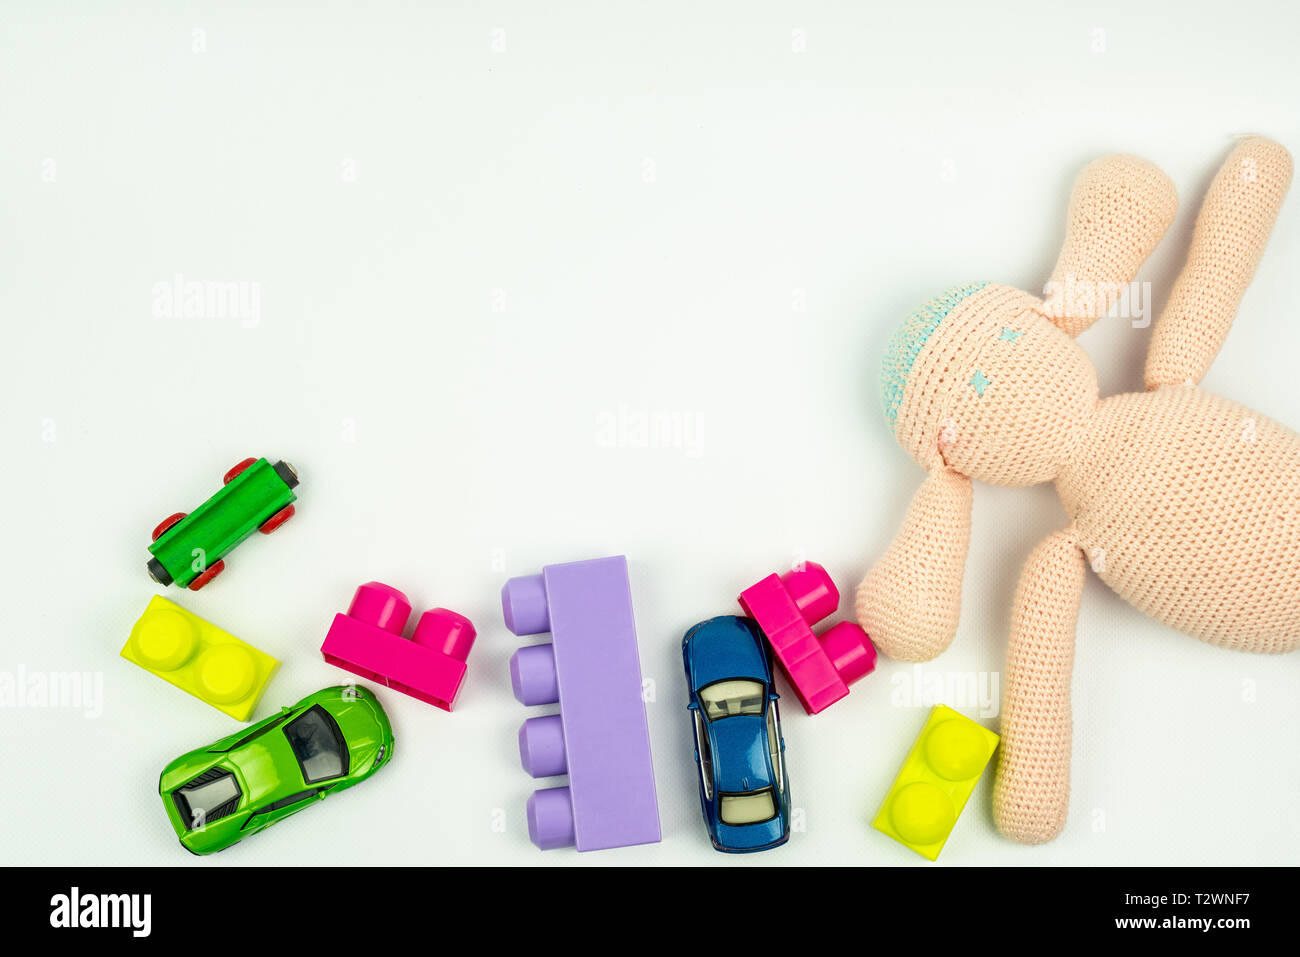 top view of toys ( cars , blocks and stuffed toy), can be used as a background Stock Photo